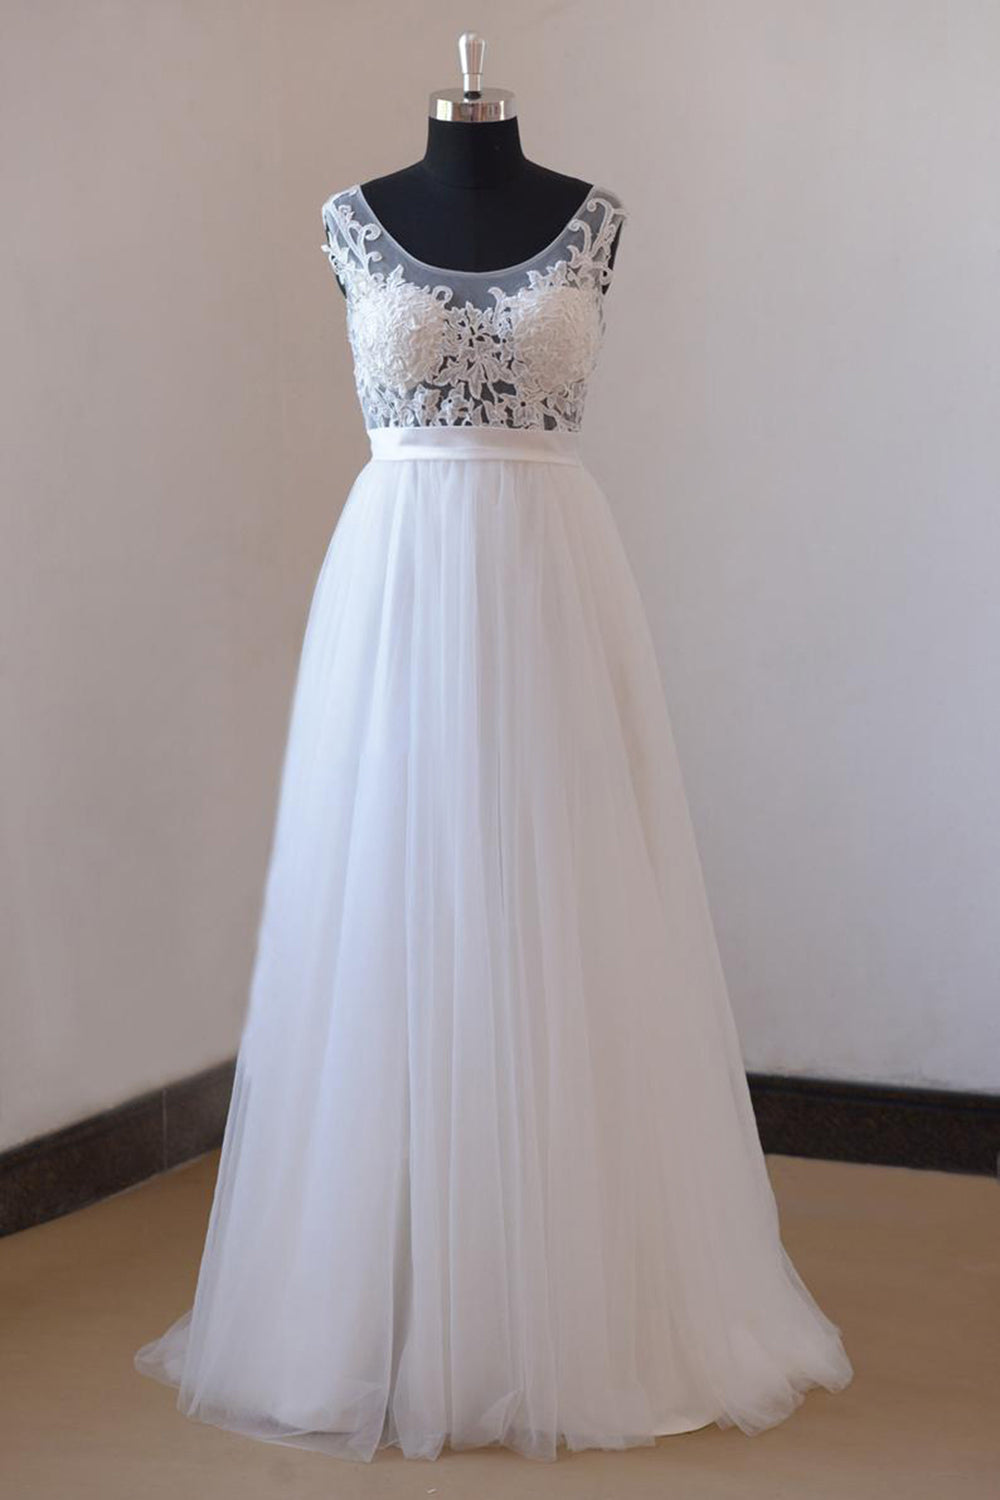 Gorgeous Jewel Appliques Sleeveless Wedding Dress Tulle Ruffles White Bridal Gowns On Sale-27dress